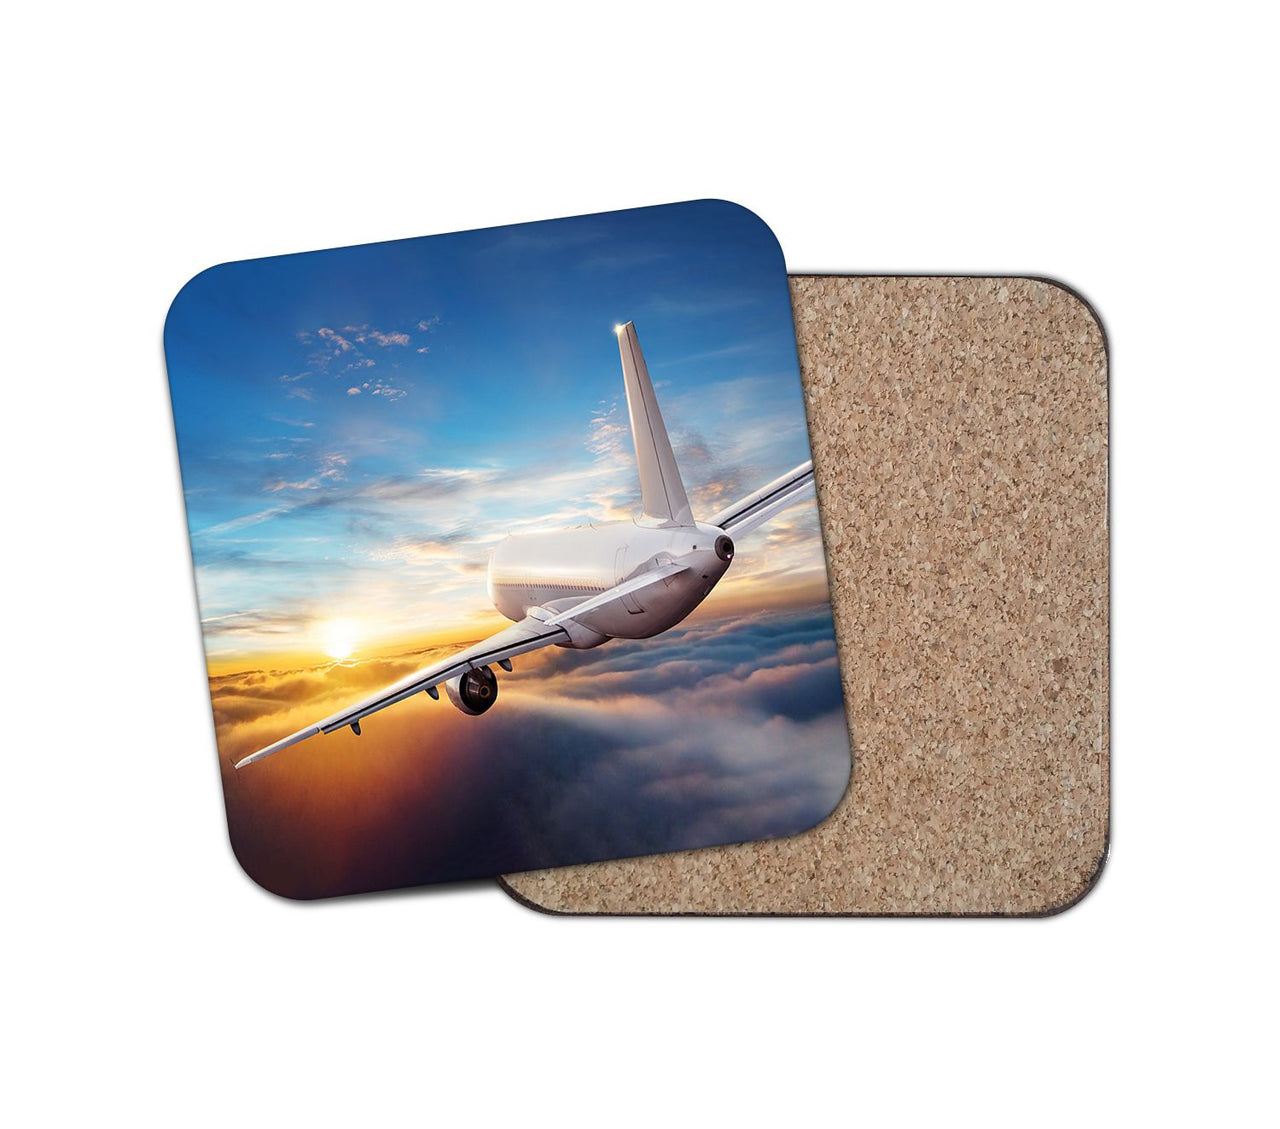 Airliner Jet Cruising over Clouds Designed Coasters